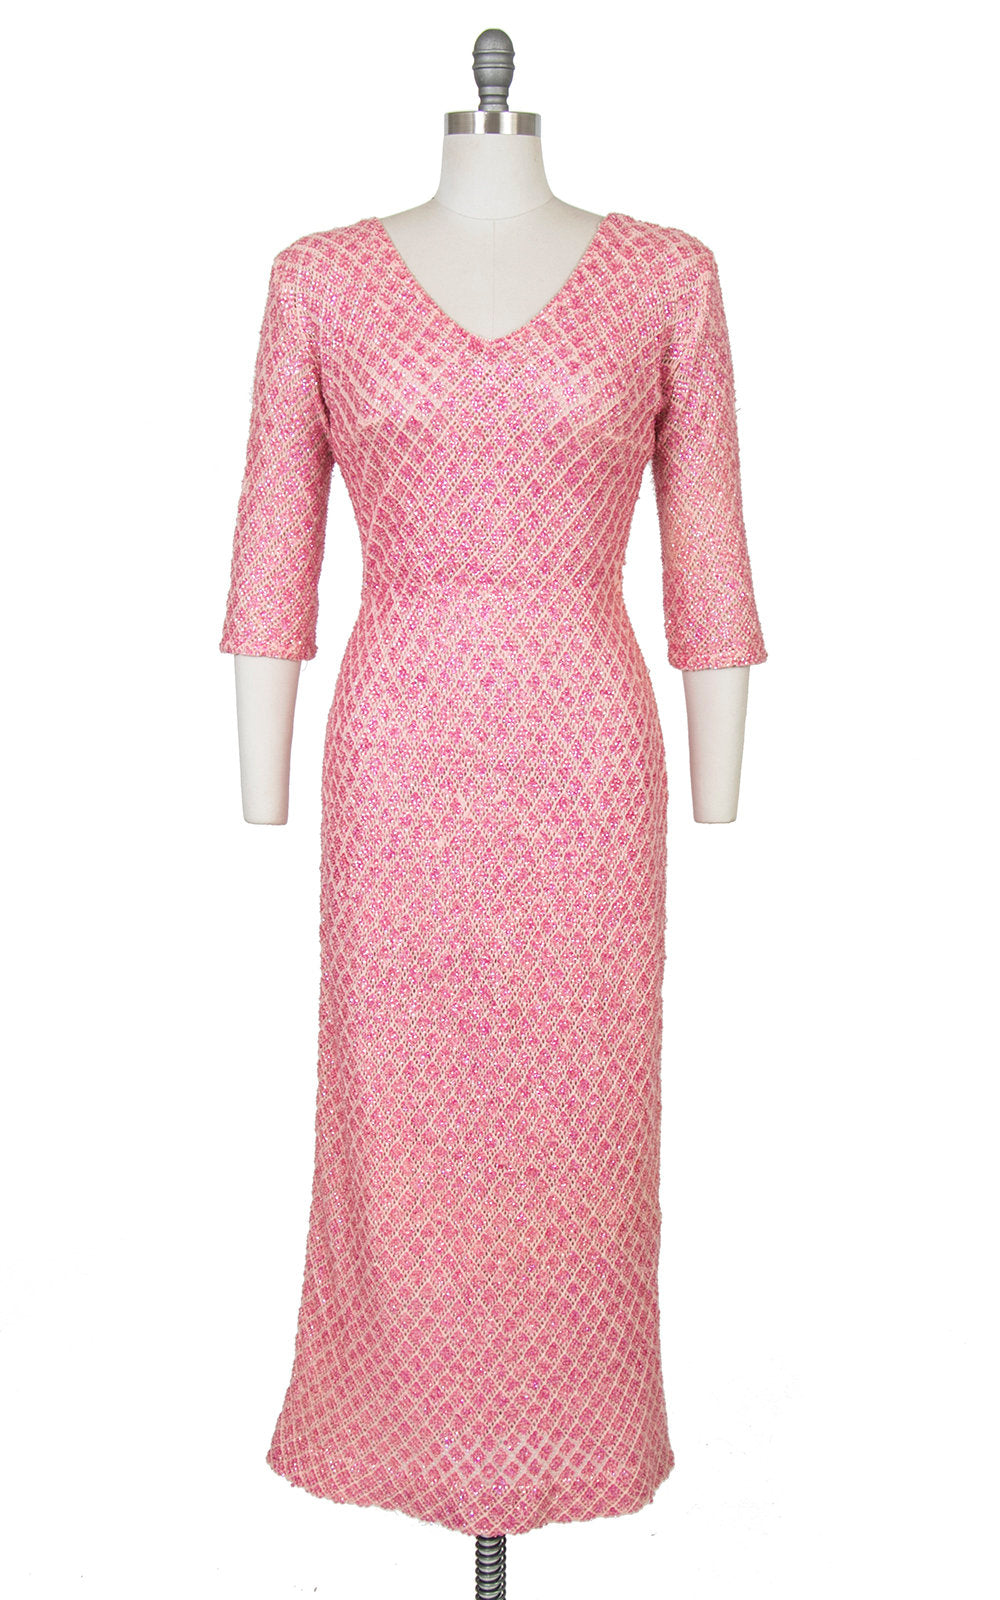 Vintage 1960s Sweater Dress | 60s Pink Iridescent Sequin Beaded Knit Wool Full Length Formal Evening Party Gown (medium/large)